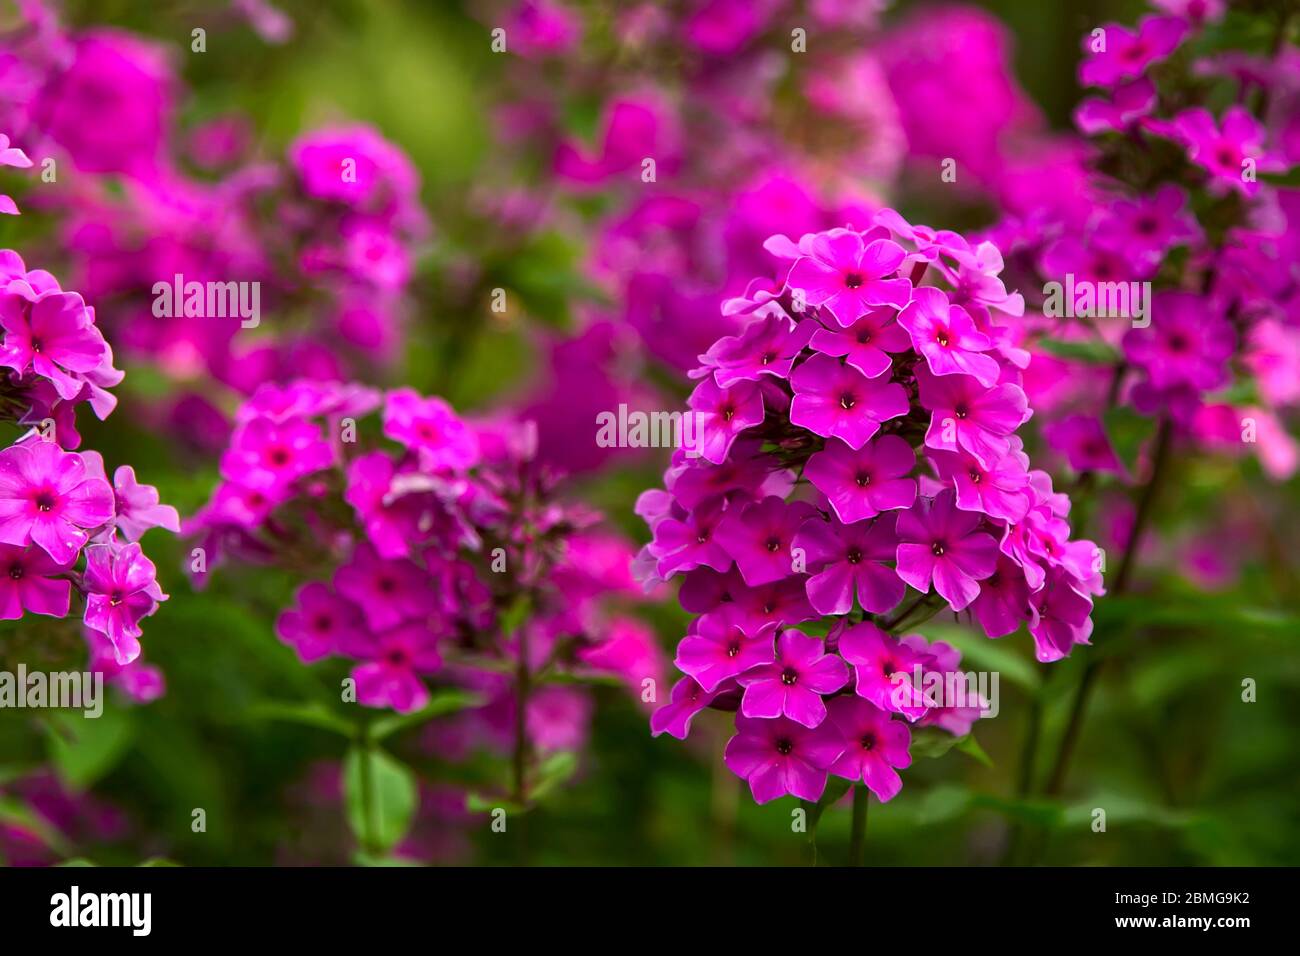 A field of beautiful pink Phlox flowers. Close up flower background. Stock Photo